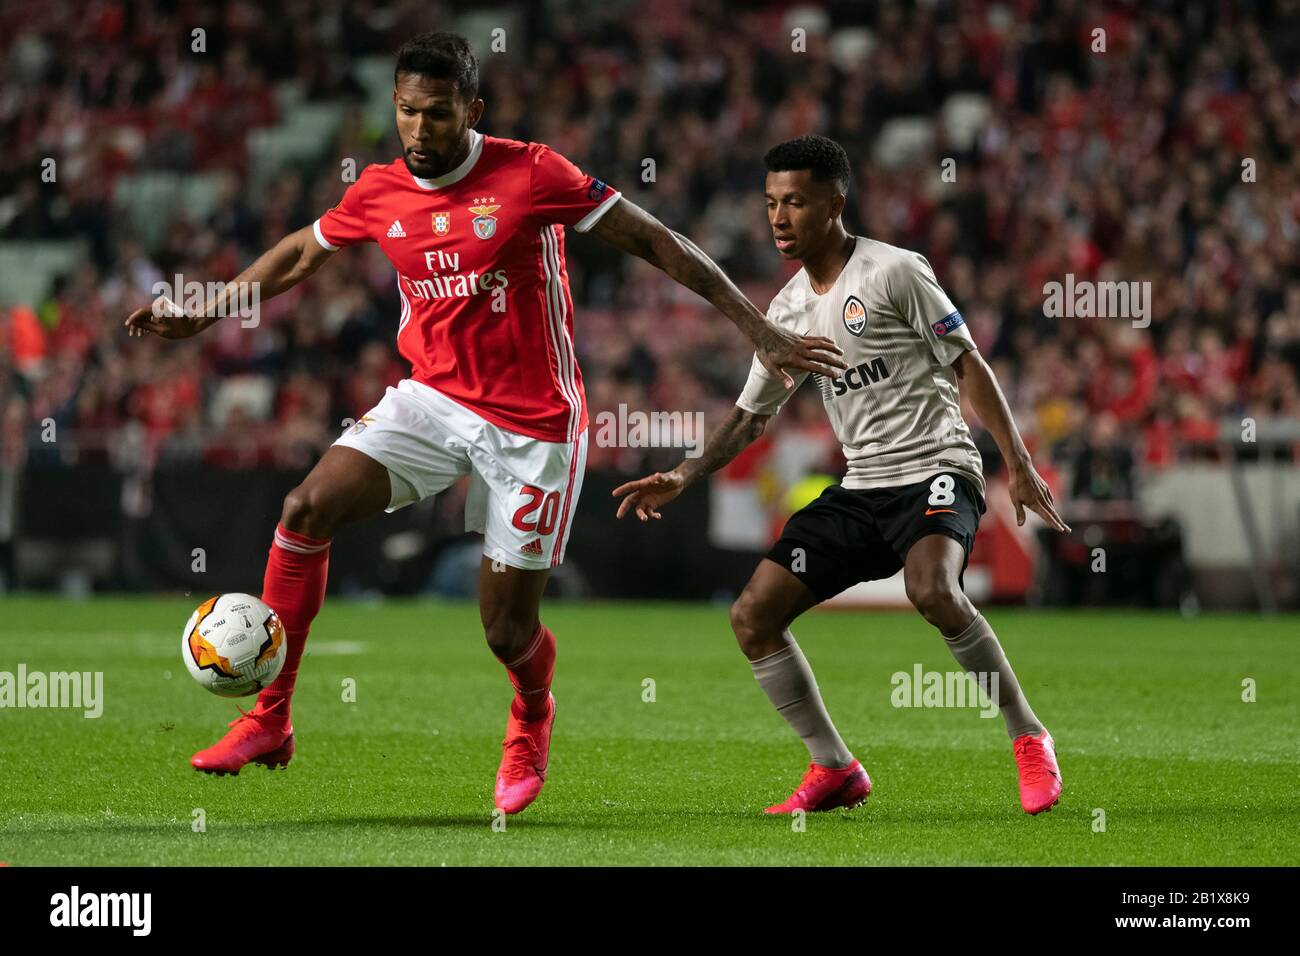 Lisbon, Portugal. 27th Feb, 2020. Dyego Sousa of SL Benfica (L) and Marcos Antonio (R) of FC Shakhtar Donetsk are seen in action during the UEFA Europa League Match 2019/20 between SL Benfica and FC Shakhtar Donetskt at Estádio da Luz in Lisbon.(Final score: SL Benfica 3:3 FC Shakhtar Donetskt) Credit: SOPA Images Limited/Alamy Live News Stock Photo